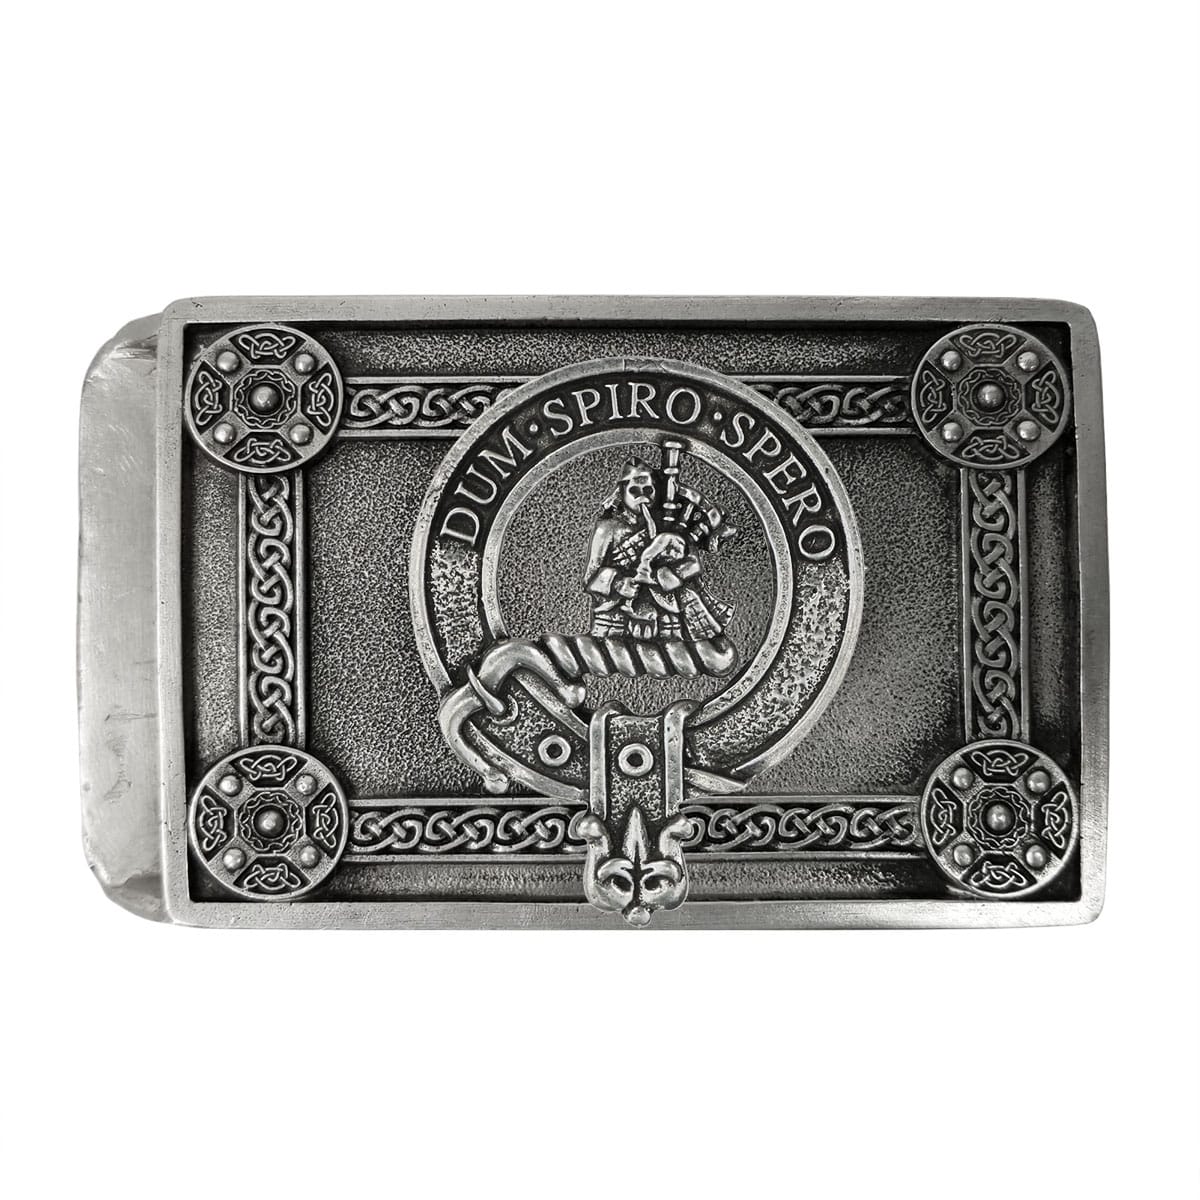 A rectangular metal Clan Crest Celtic Knot Kilt Belt Buckle with an ornate design featuring a knight on horseback and the Latin phrase "Dum Spiro Spero" inscribed in a circular border, reminiscent of a clan crest.